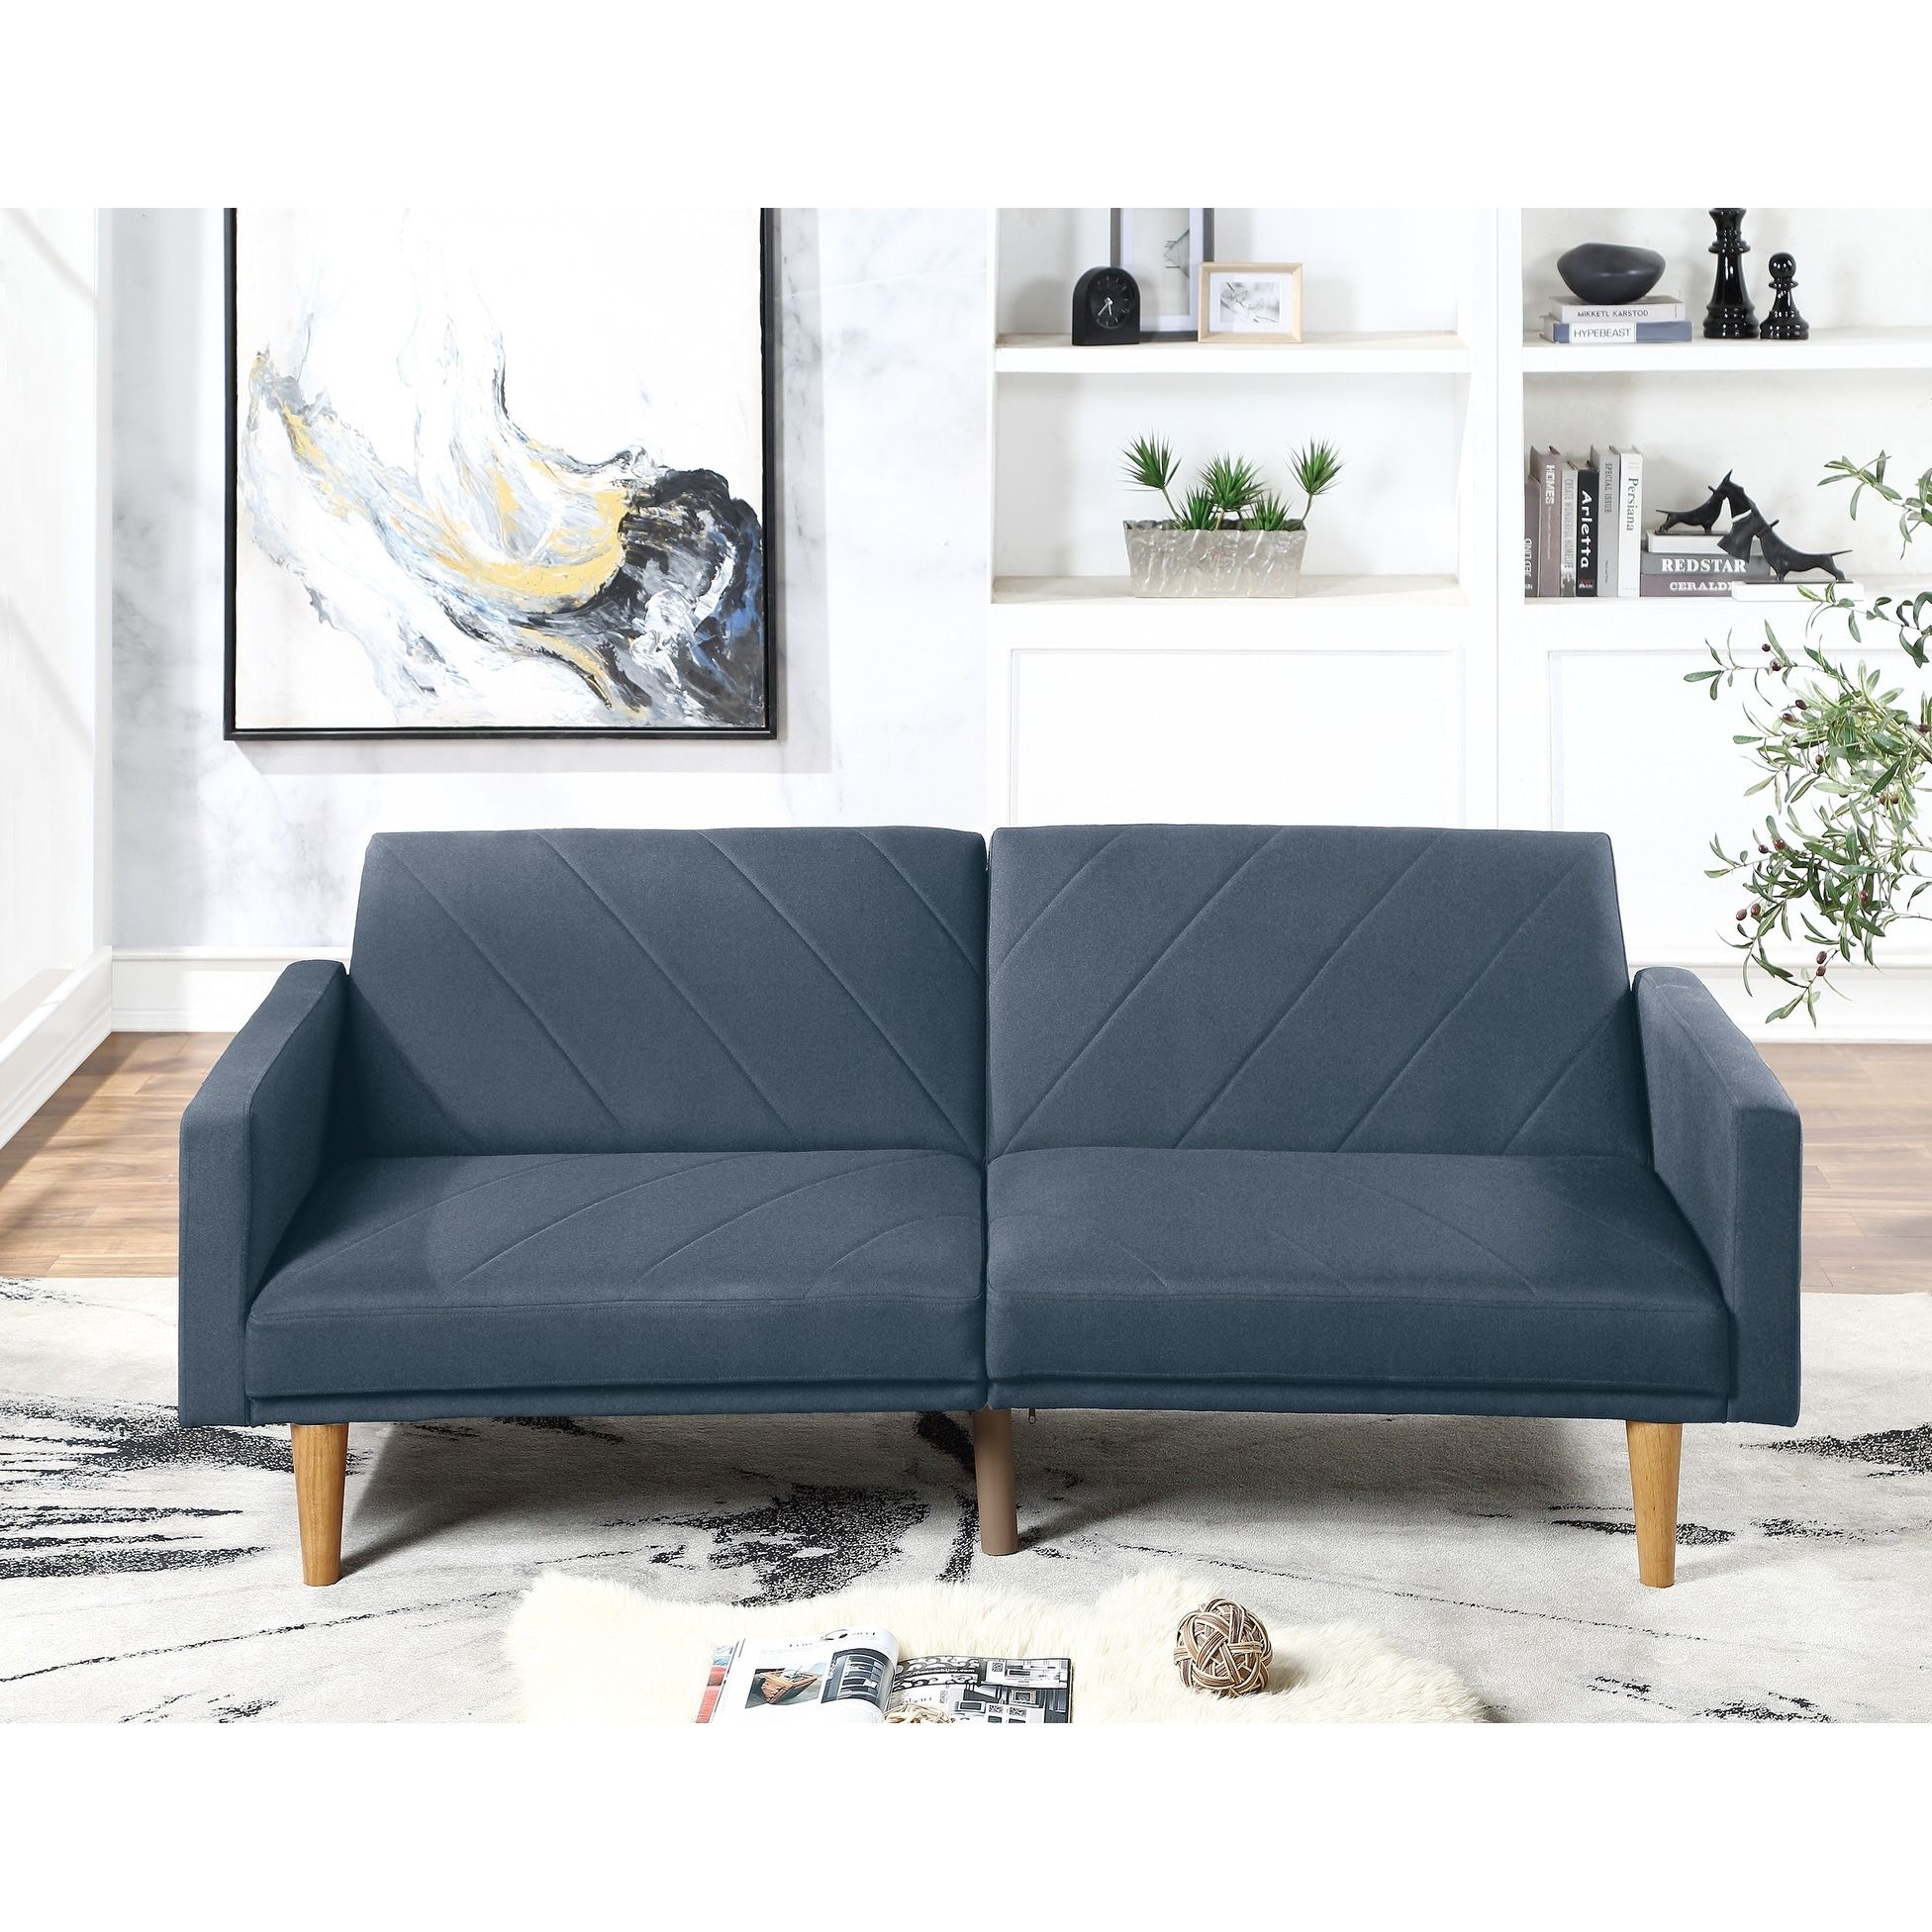 Modern Electric Look 1pc Convertible Sofa Couch Navy Color Linen Like  Fabric Cushion Wooden Legs Living Room – Bed Bath & Beyond – 35204646 Throughout Navy Sleeper Sofa Couches (View 7 of 15)